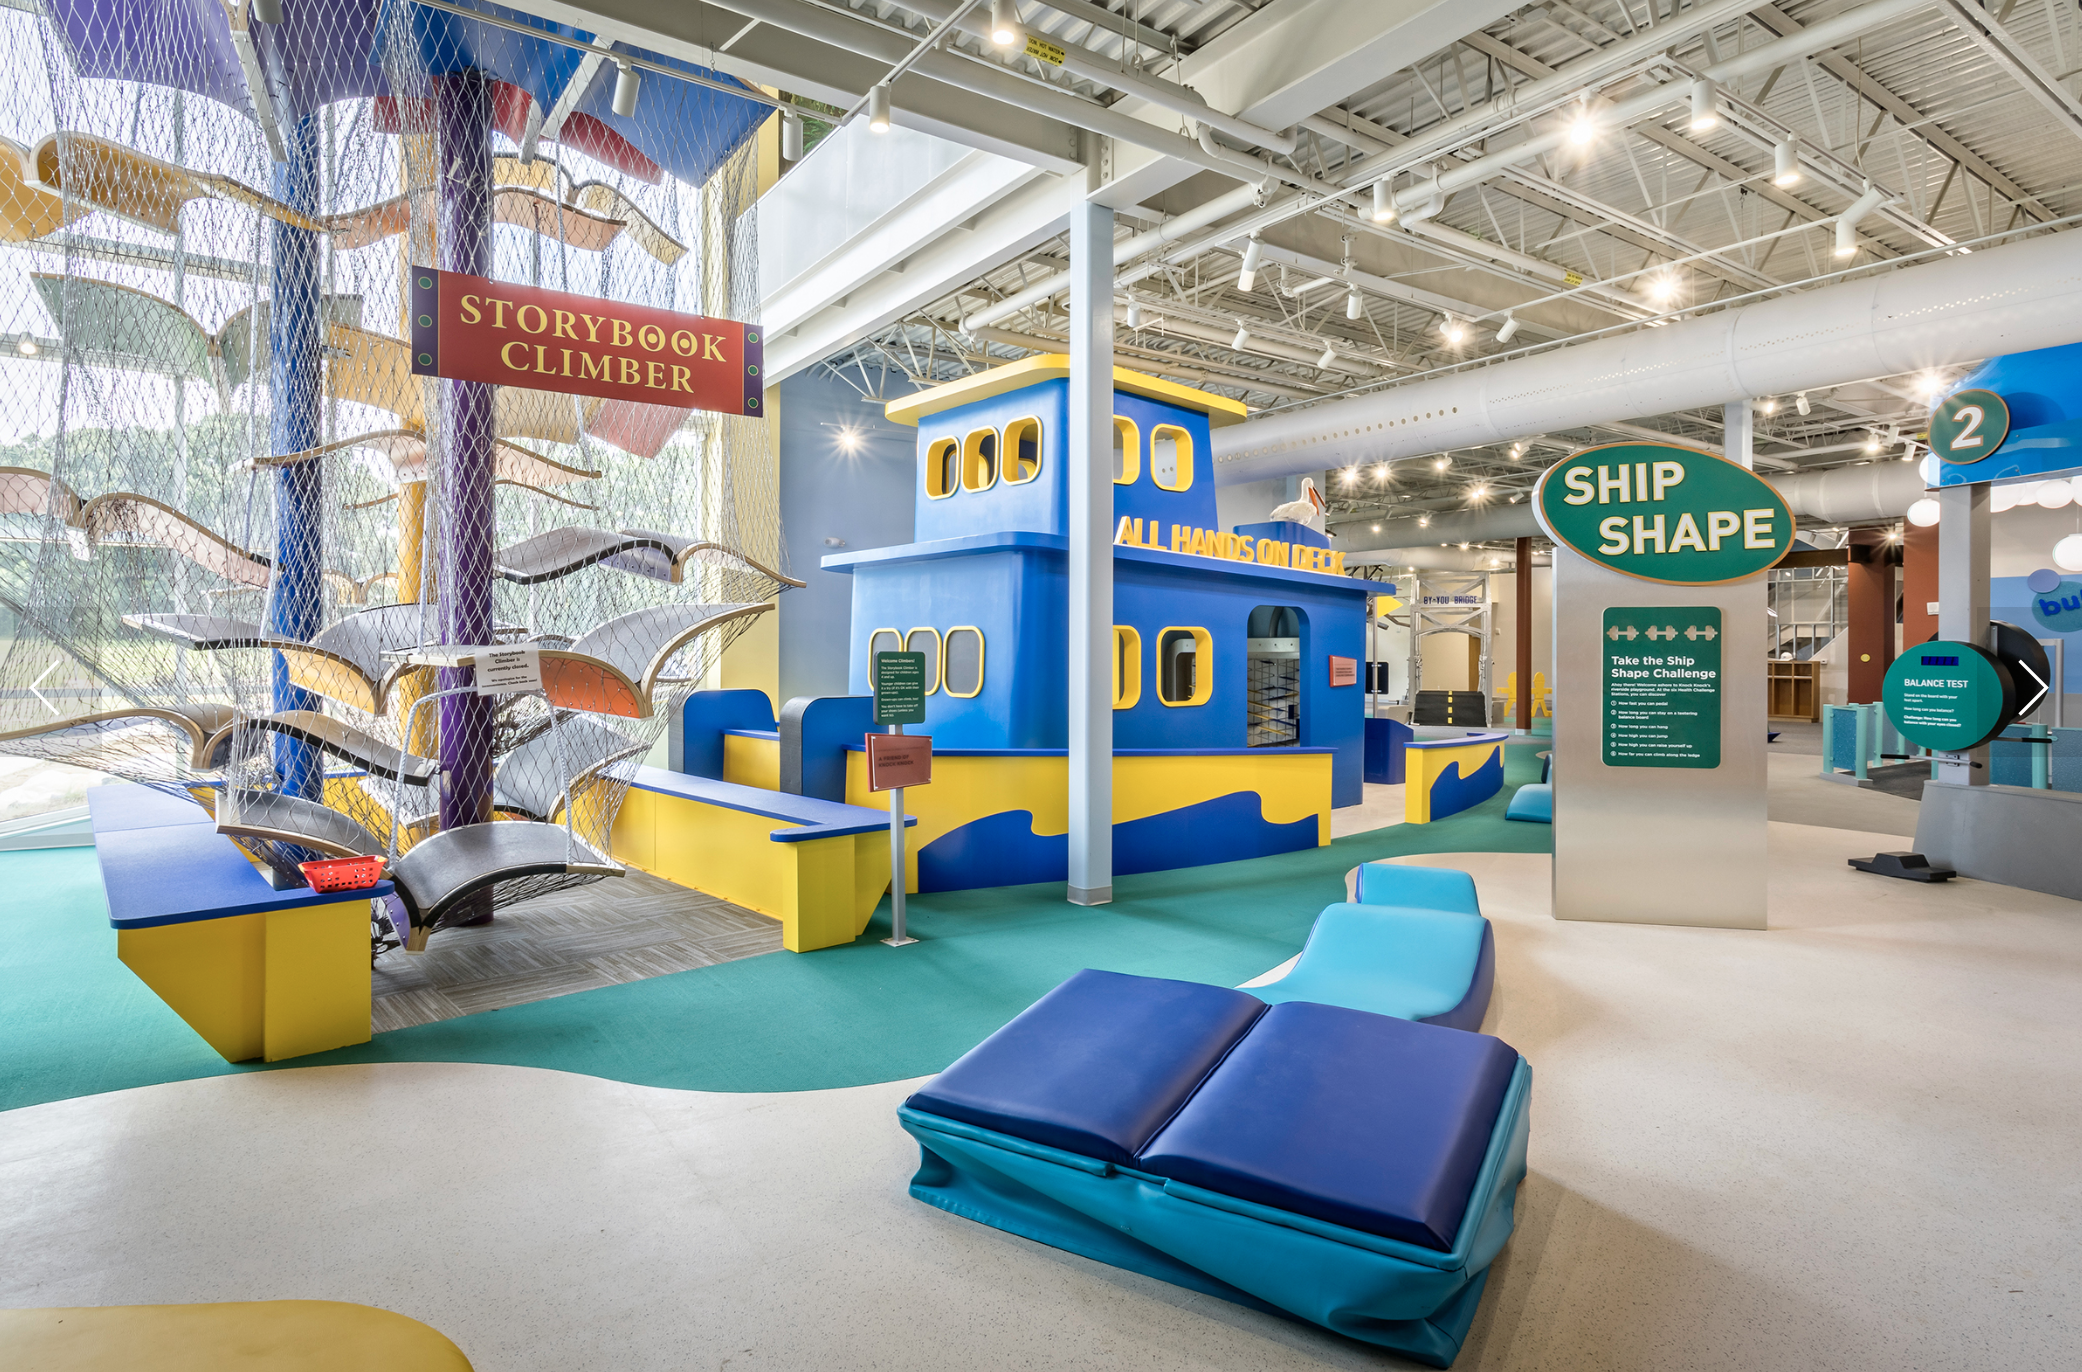 image of lower level of museum that depicts a climbing tower, a playhouse boat and exercise equipment